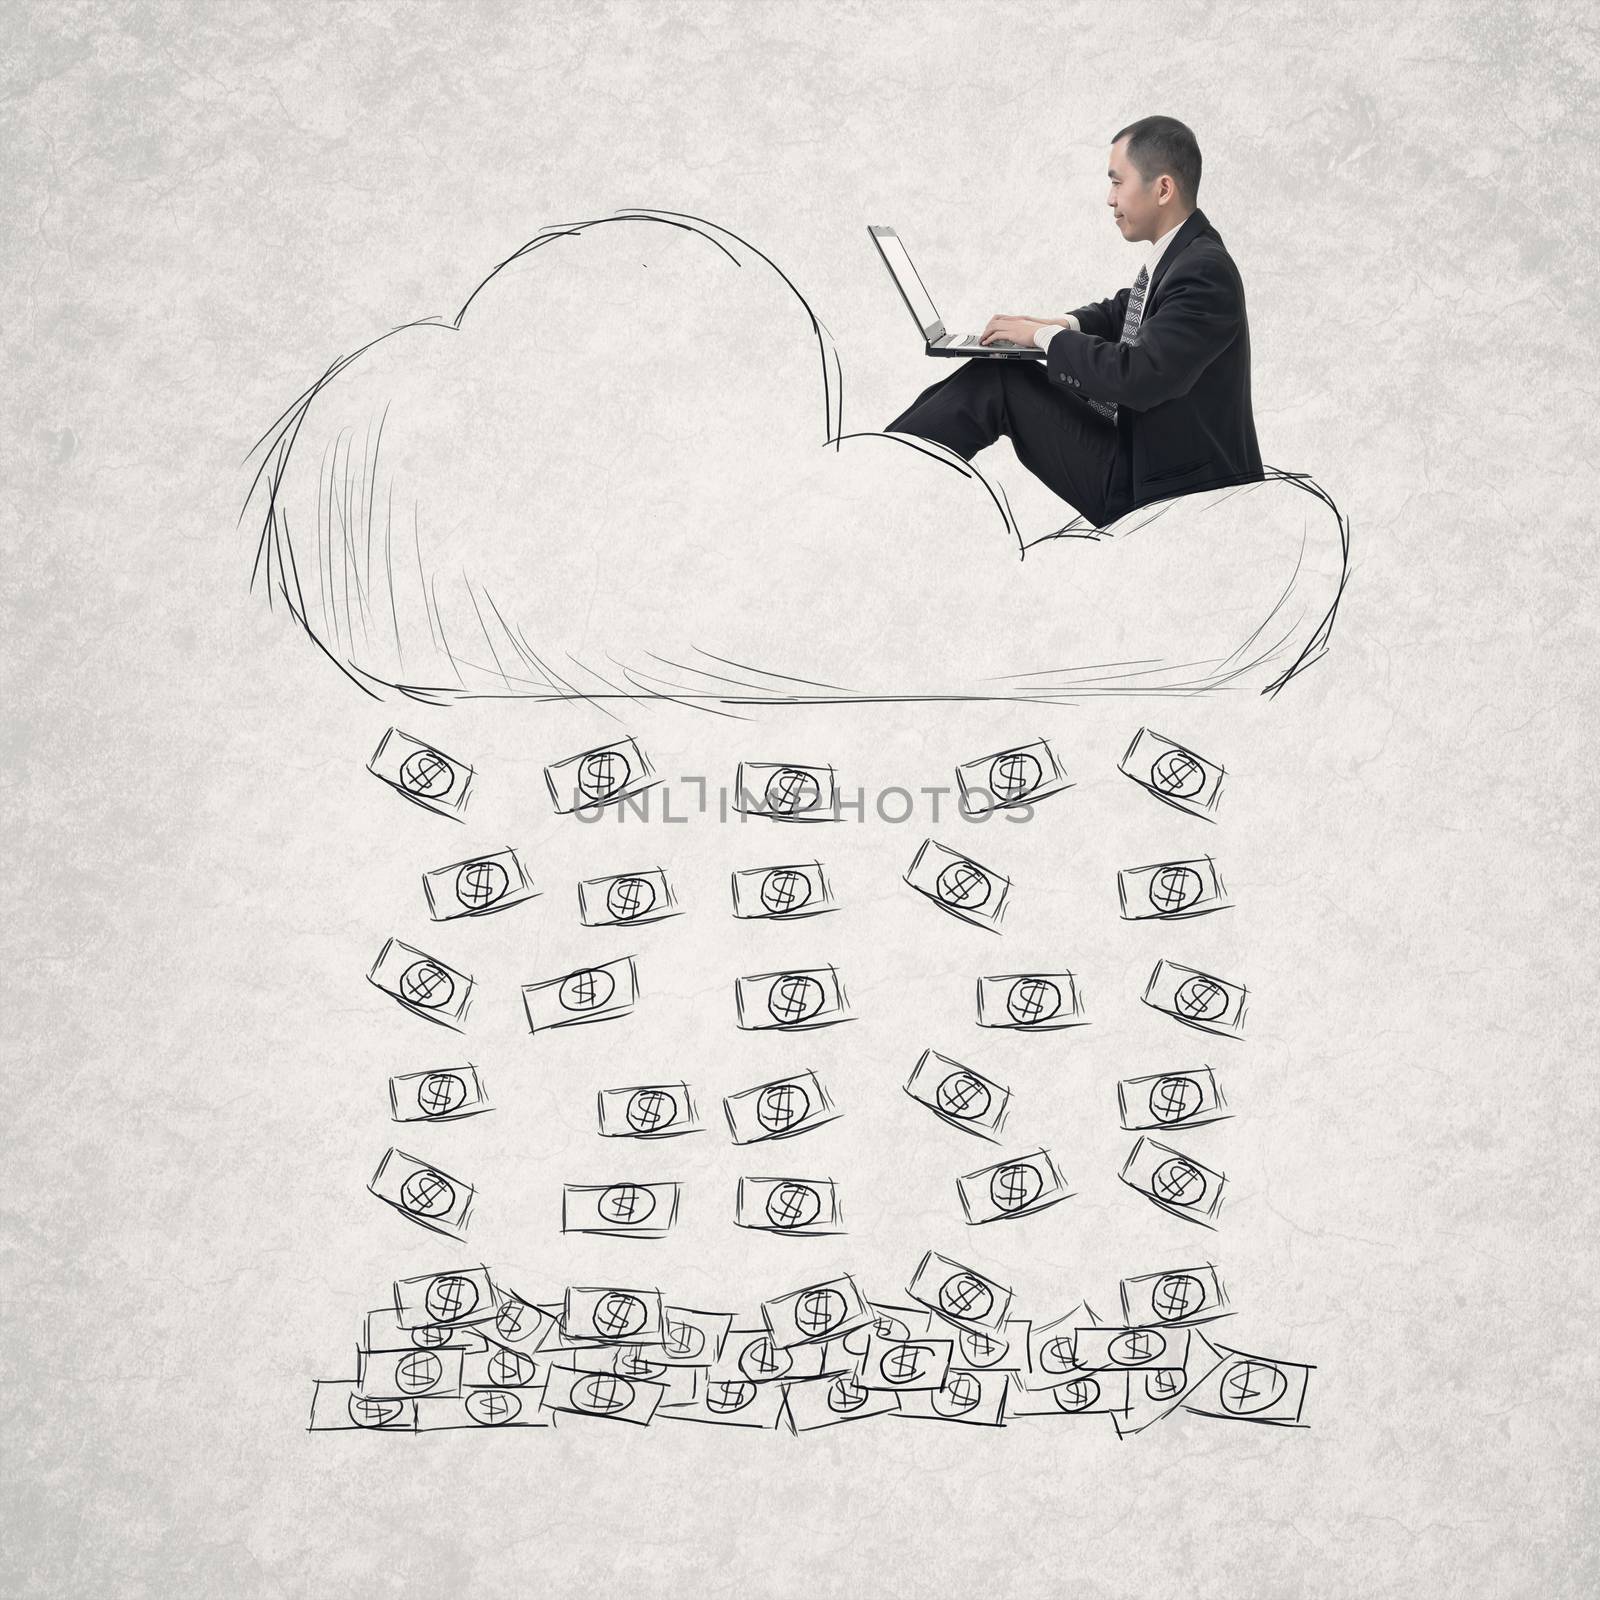 Asian businessman working on cloud. Photo compilation with hand drawn background.